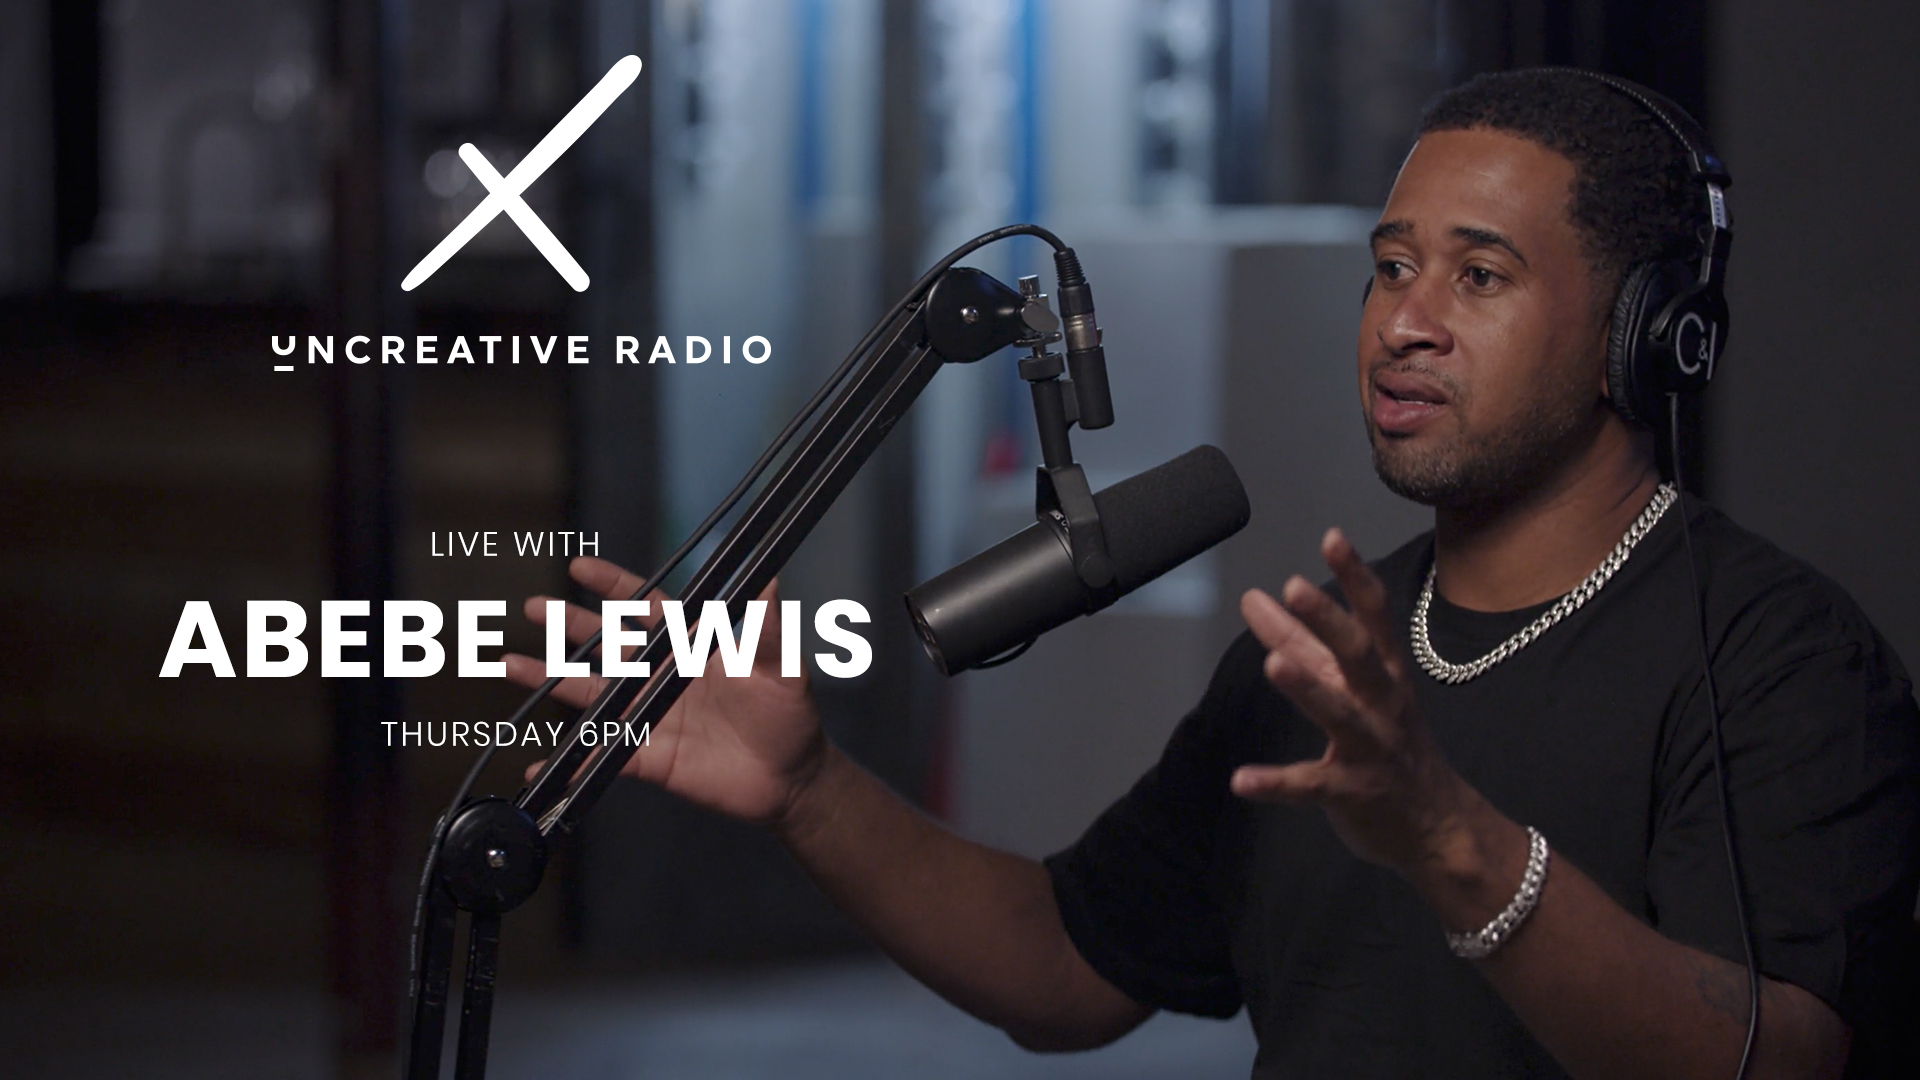 IU C&I Studios Page Uncreative Radio Live with Abebe Lewis title wearing black headphones by microphone gesturing with arms and hands in the air